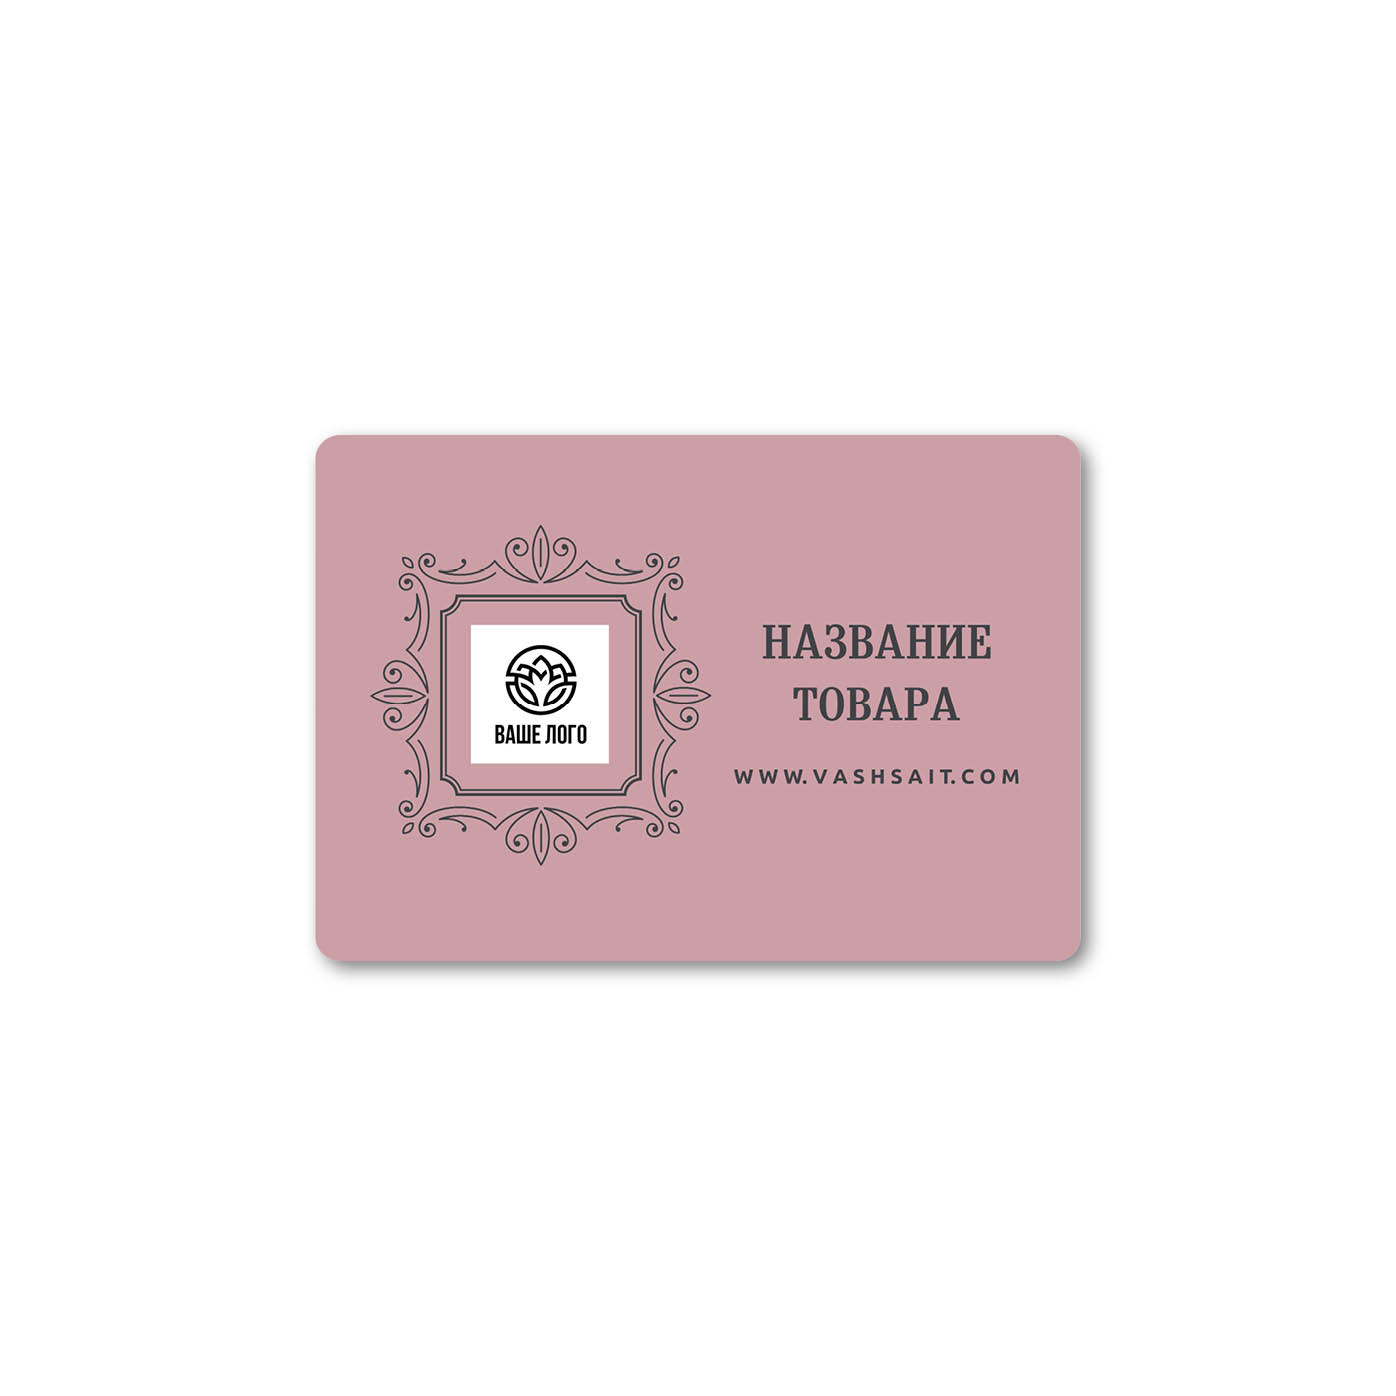 Stickers, rectangular labels Pink background and grey text